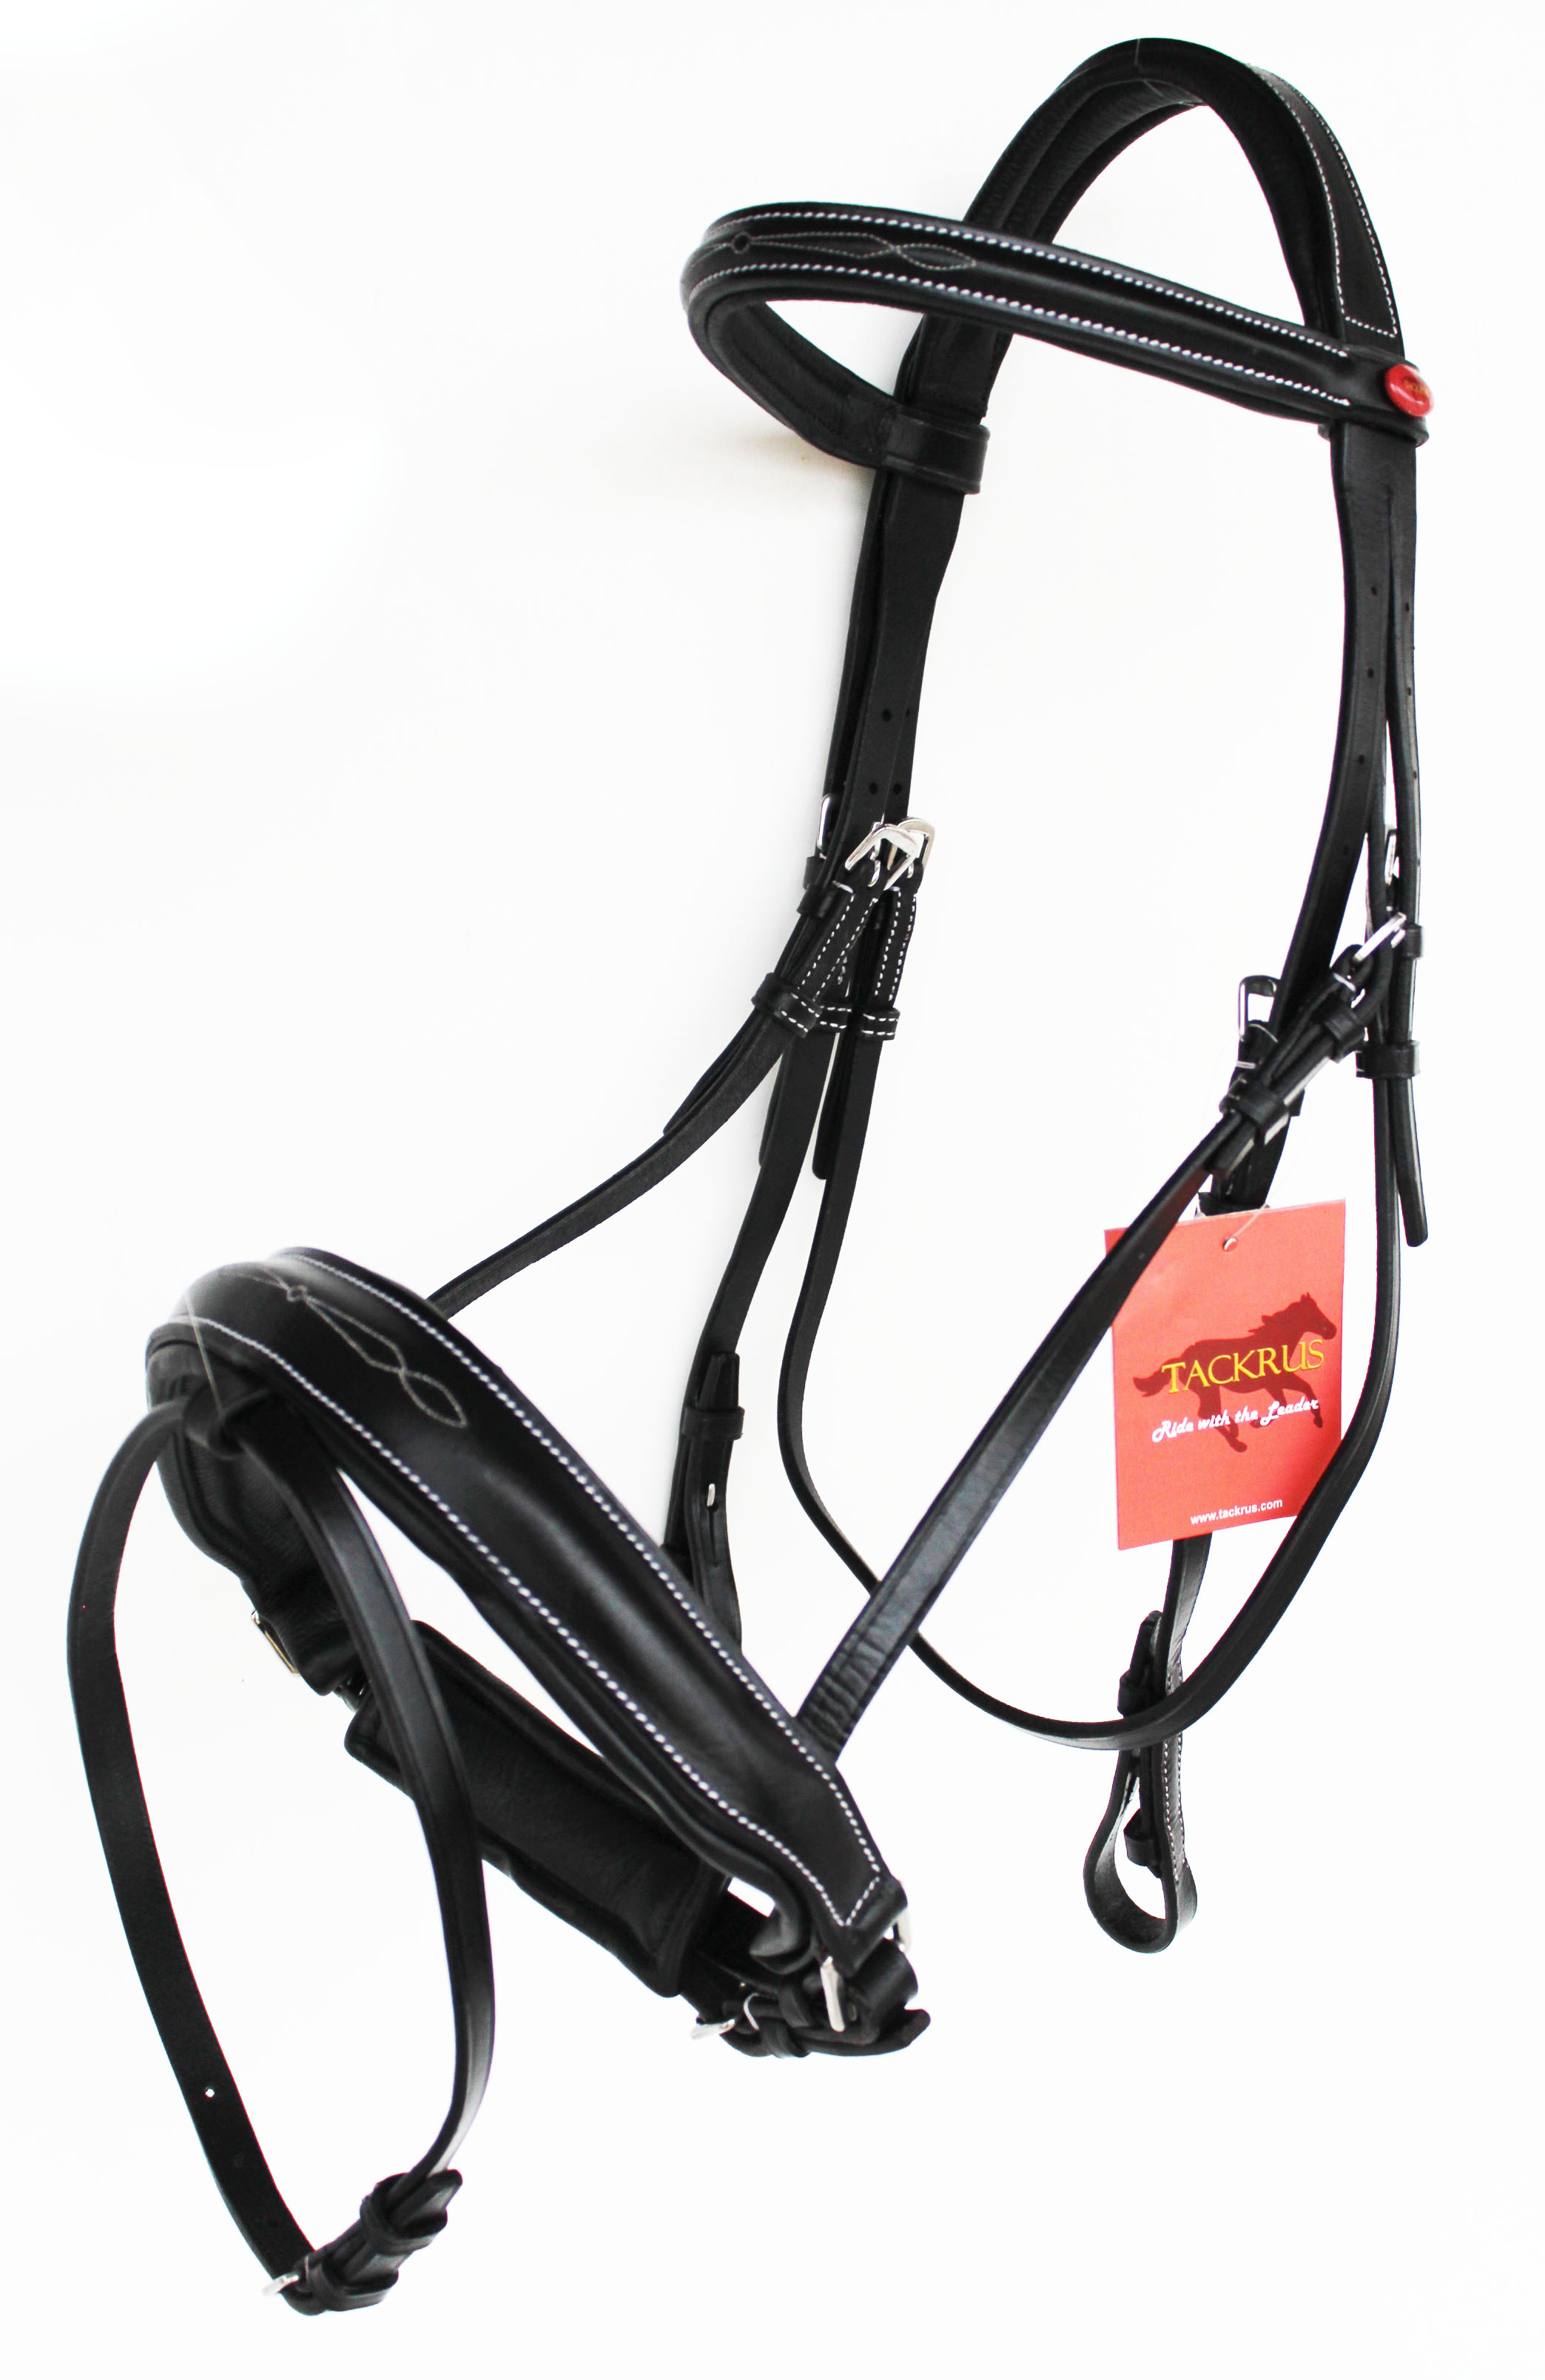 Horse English At the price of surprise Padded Leather Raised Adjustable Flash Rein Bridle It is very popular